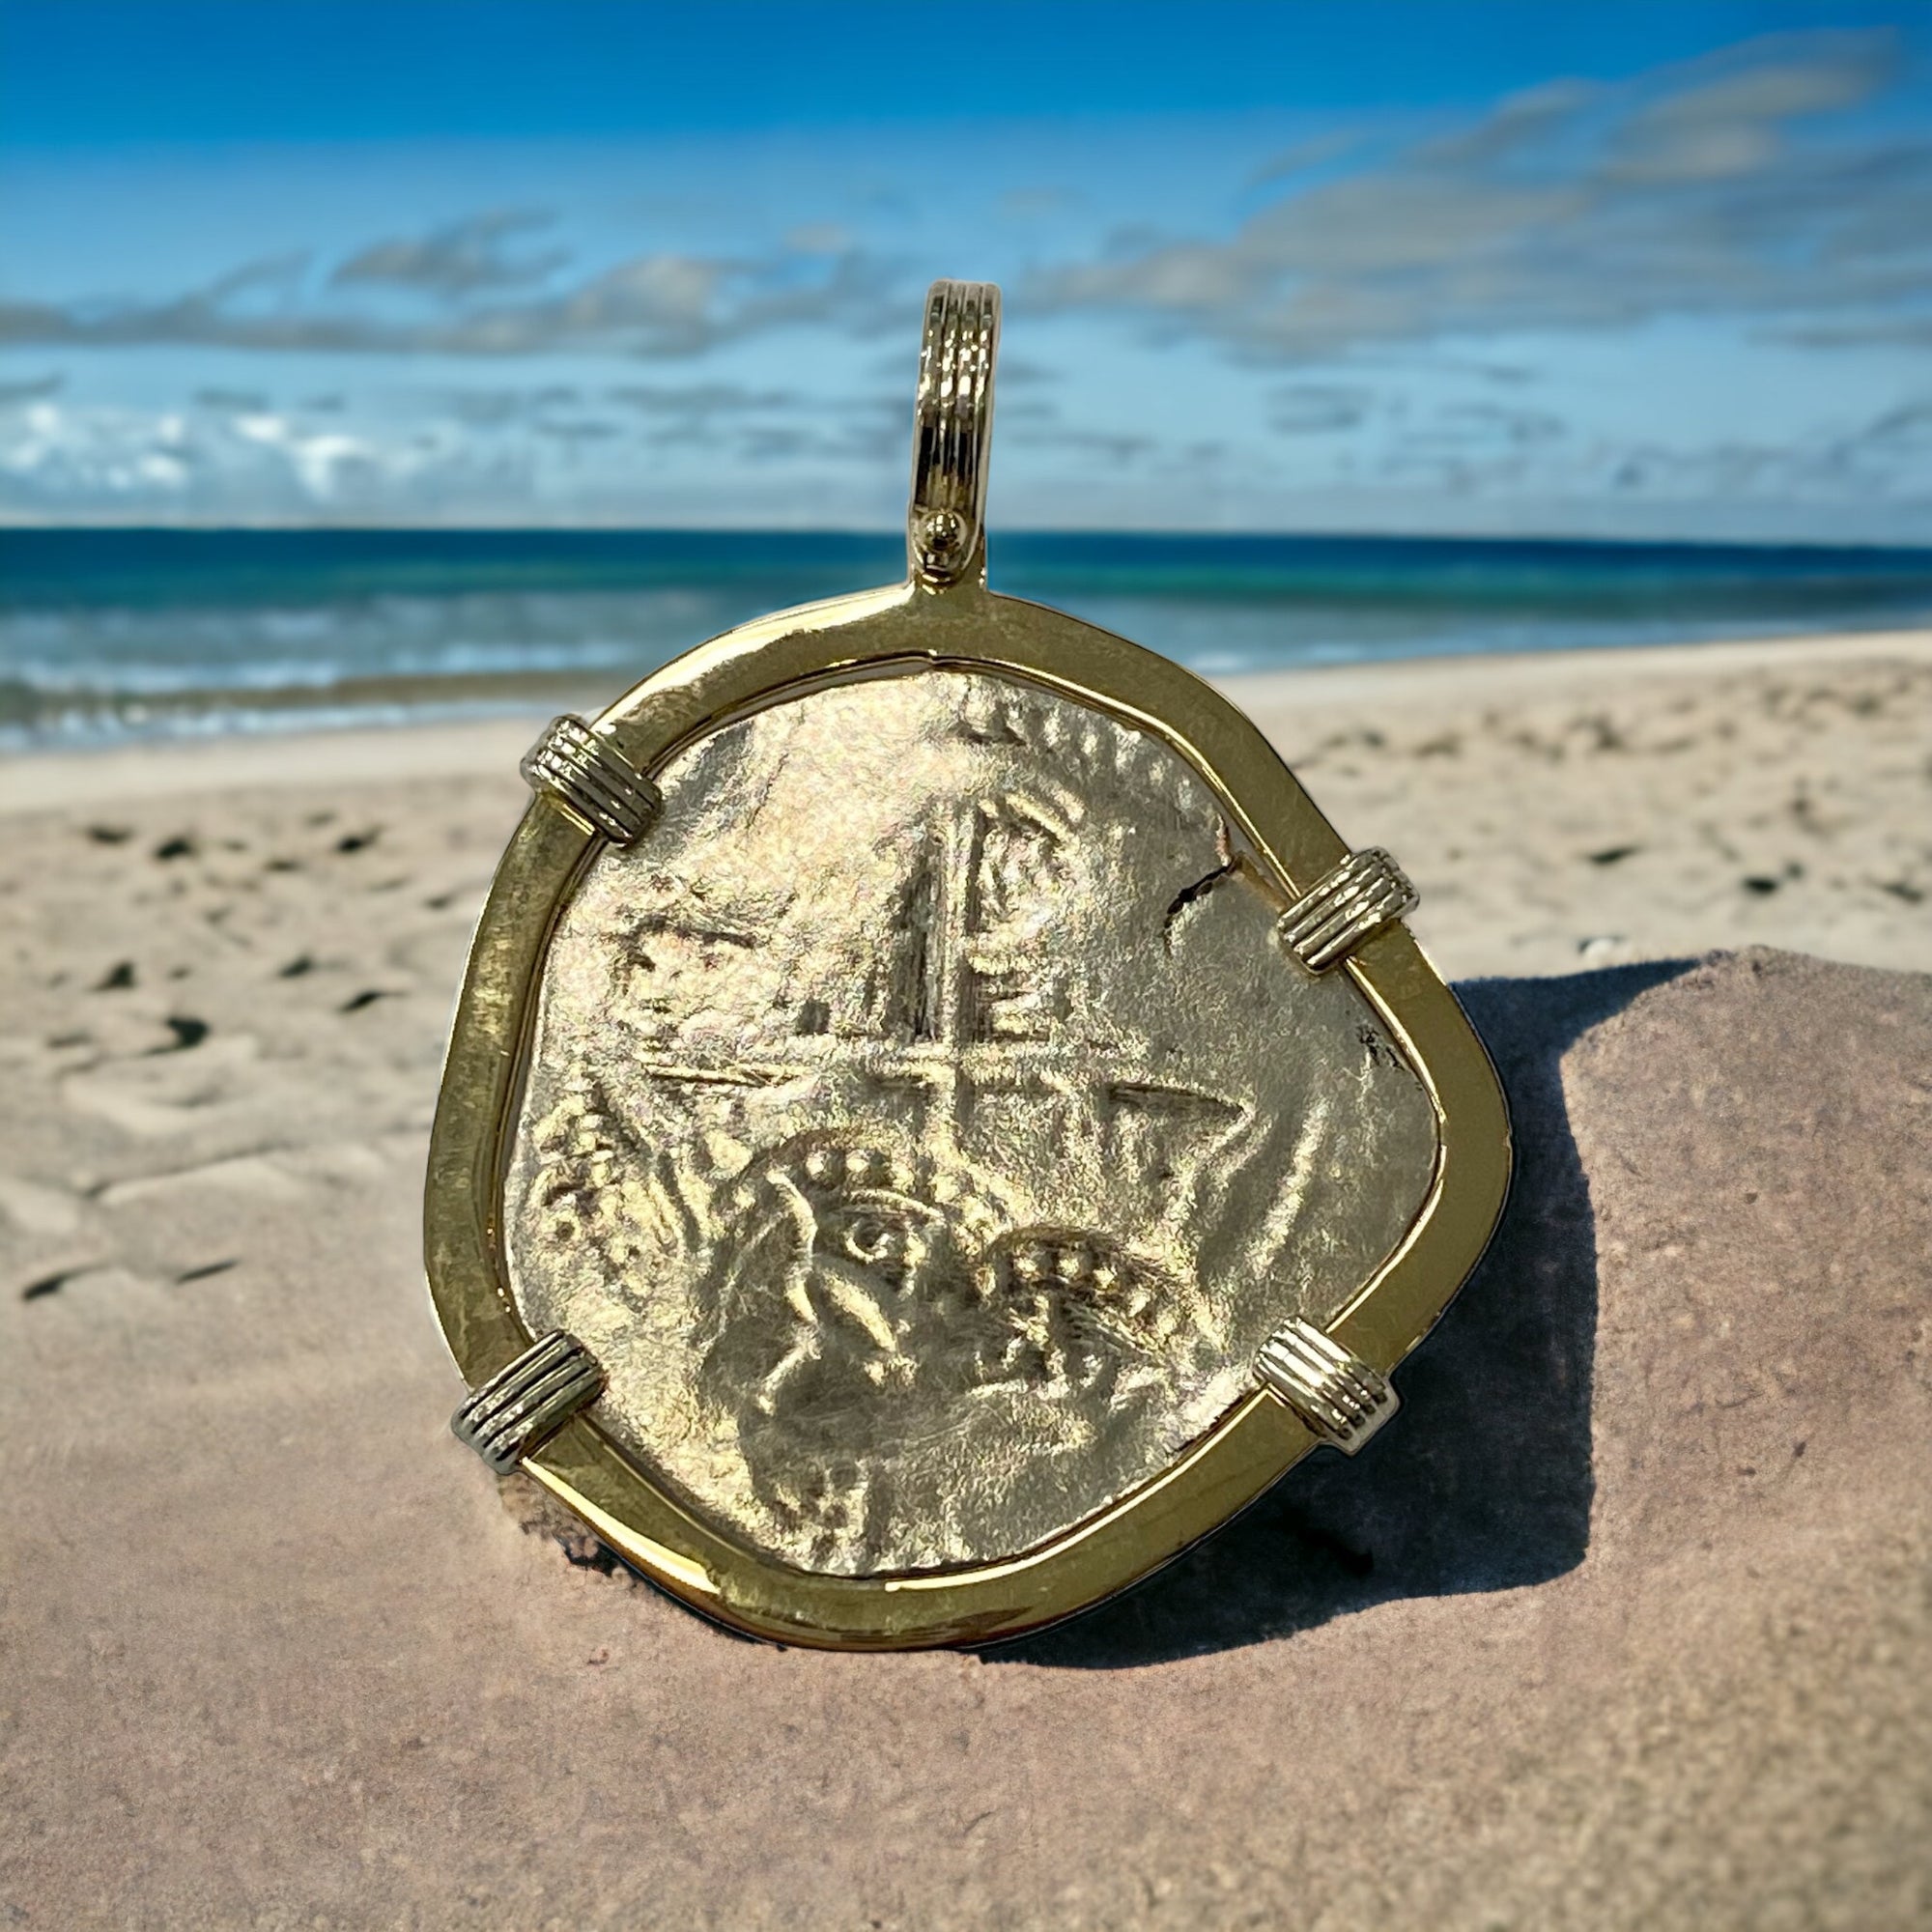 La Capitana Shipwreck - 8 Reales - "rare double crown marks on cross side" - Mounted in 14K gold